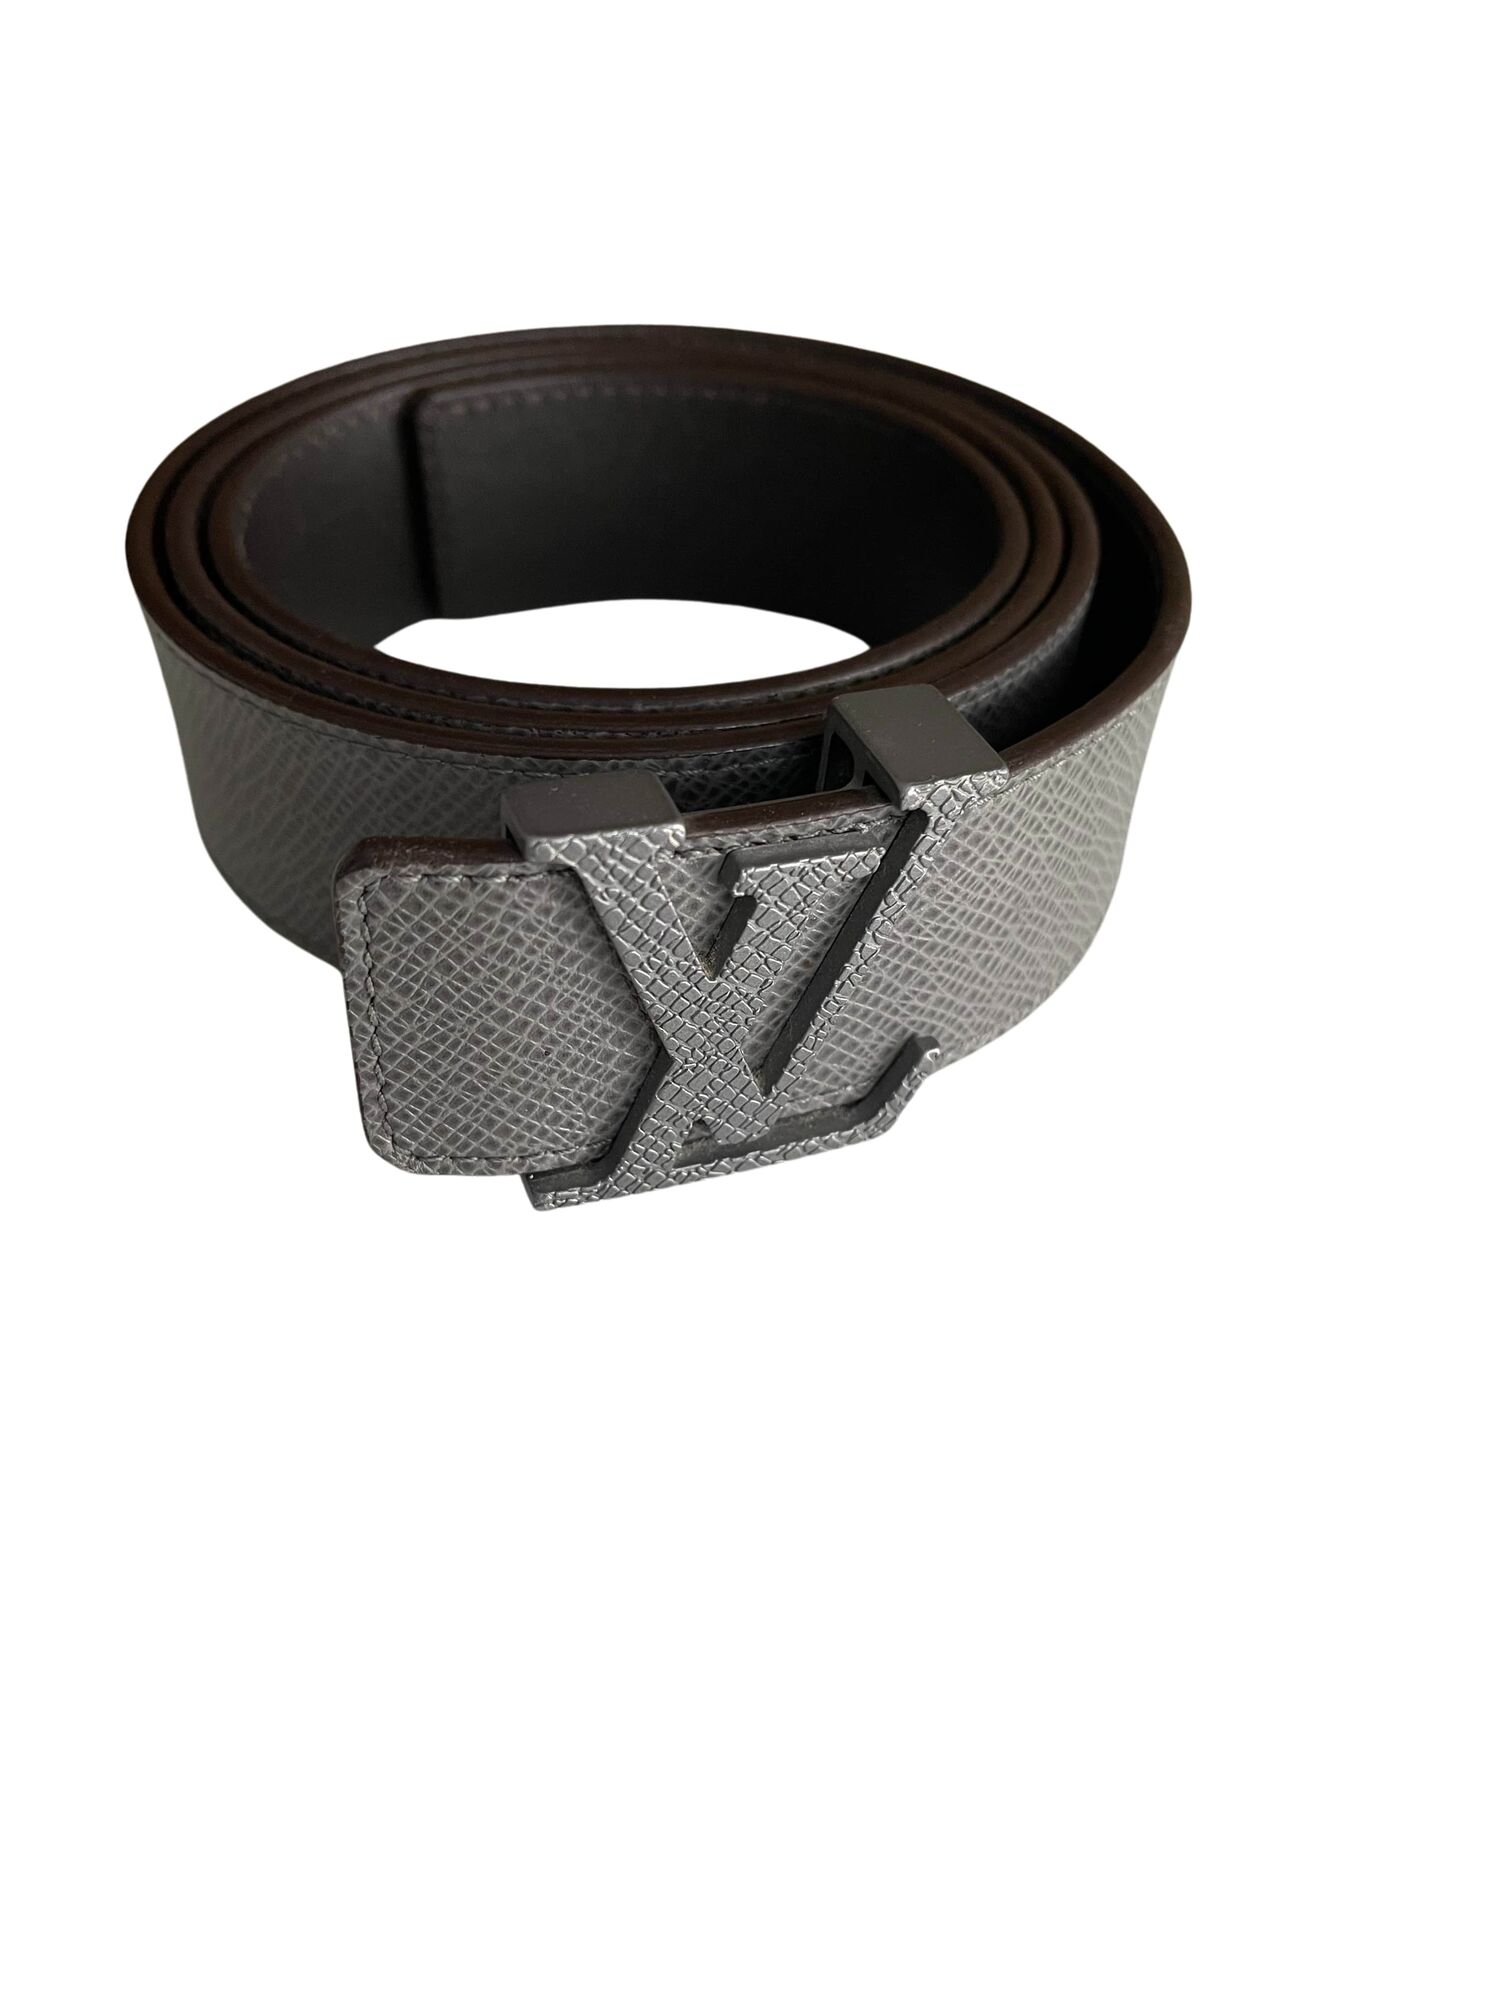 Leather grey belt Louis Vuitton, buy pre-owned at 223 EUR